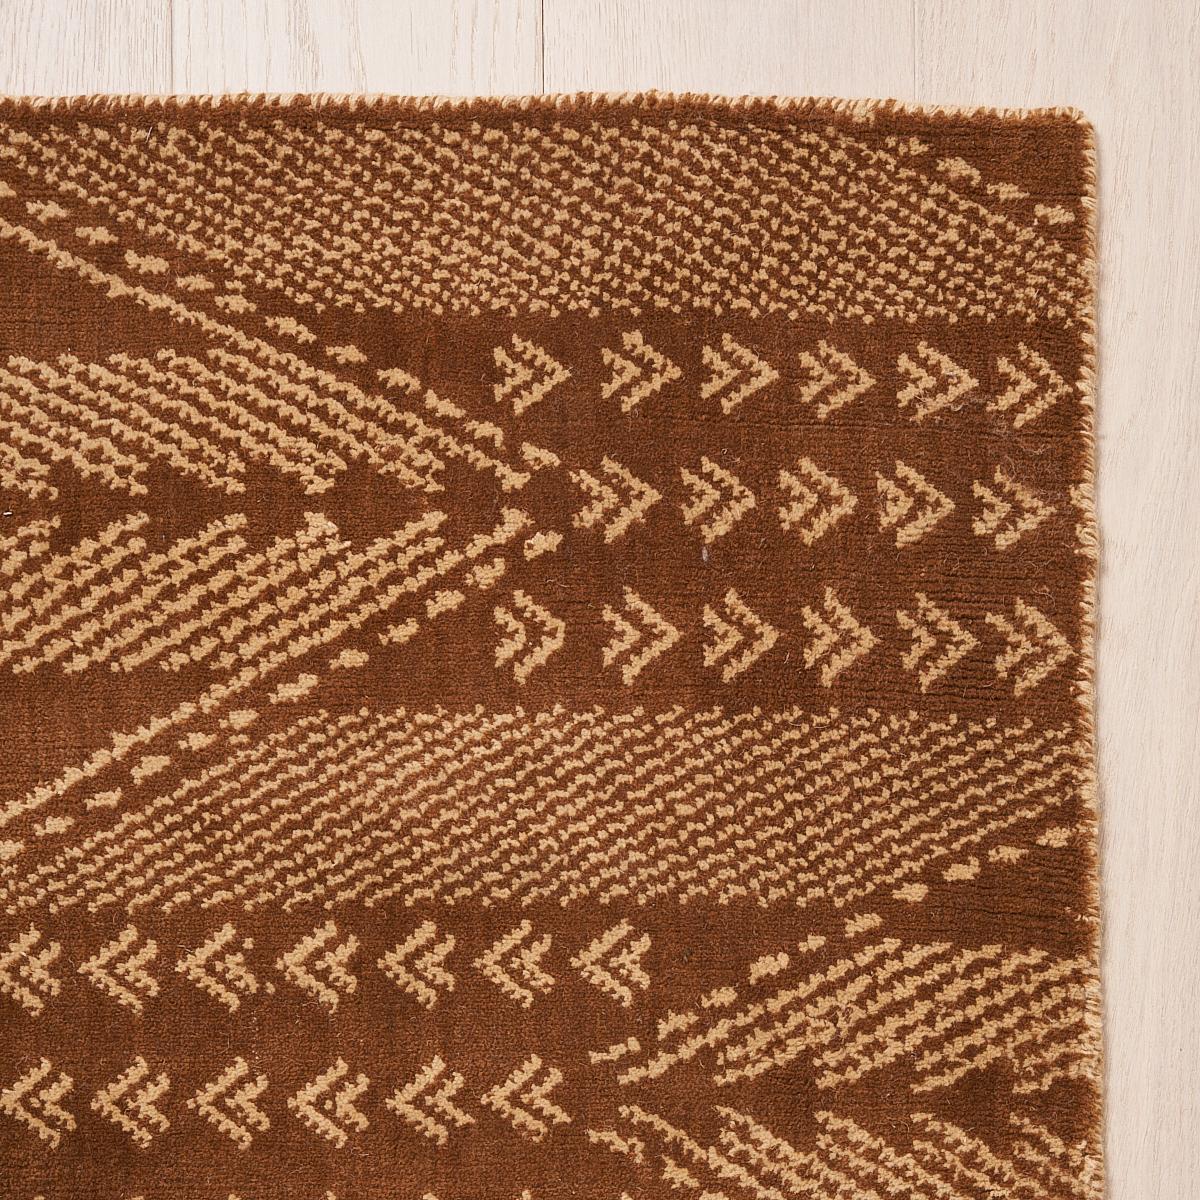 This rug will ship in December. Made with a wool-and-cotton jacquard weave, Fitzgerald is a large-scale zigzag pattern with unique chevron details and lovely texture. An adaptation of our popular Fitzgerald fabric, this dynamic, Art Deco–inspired